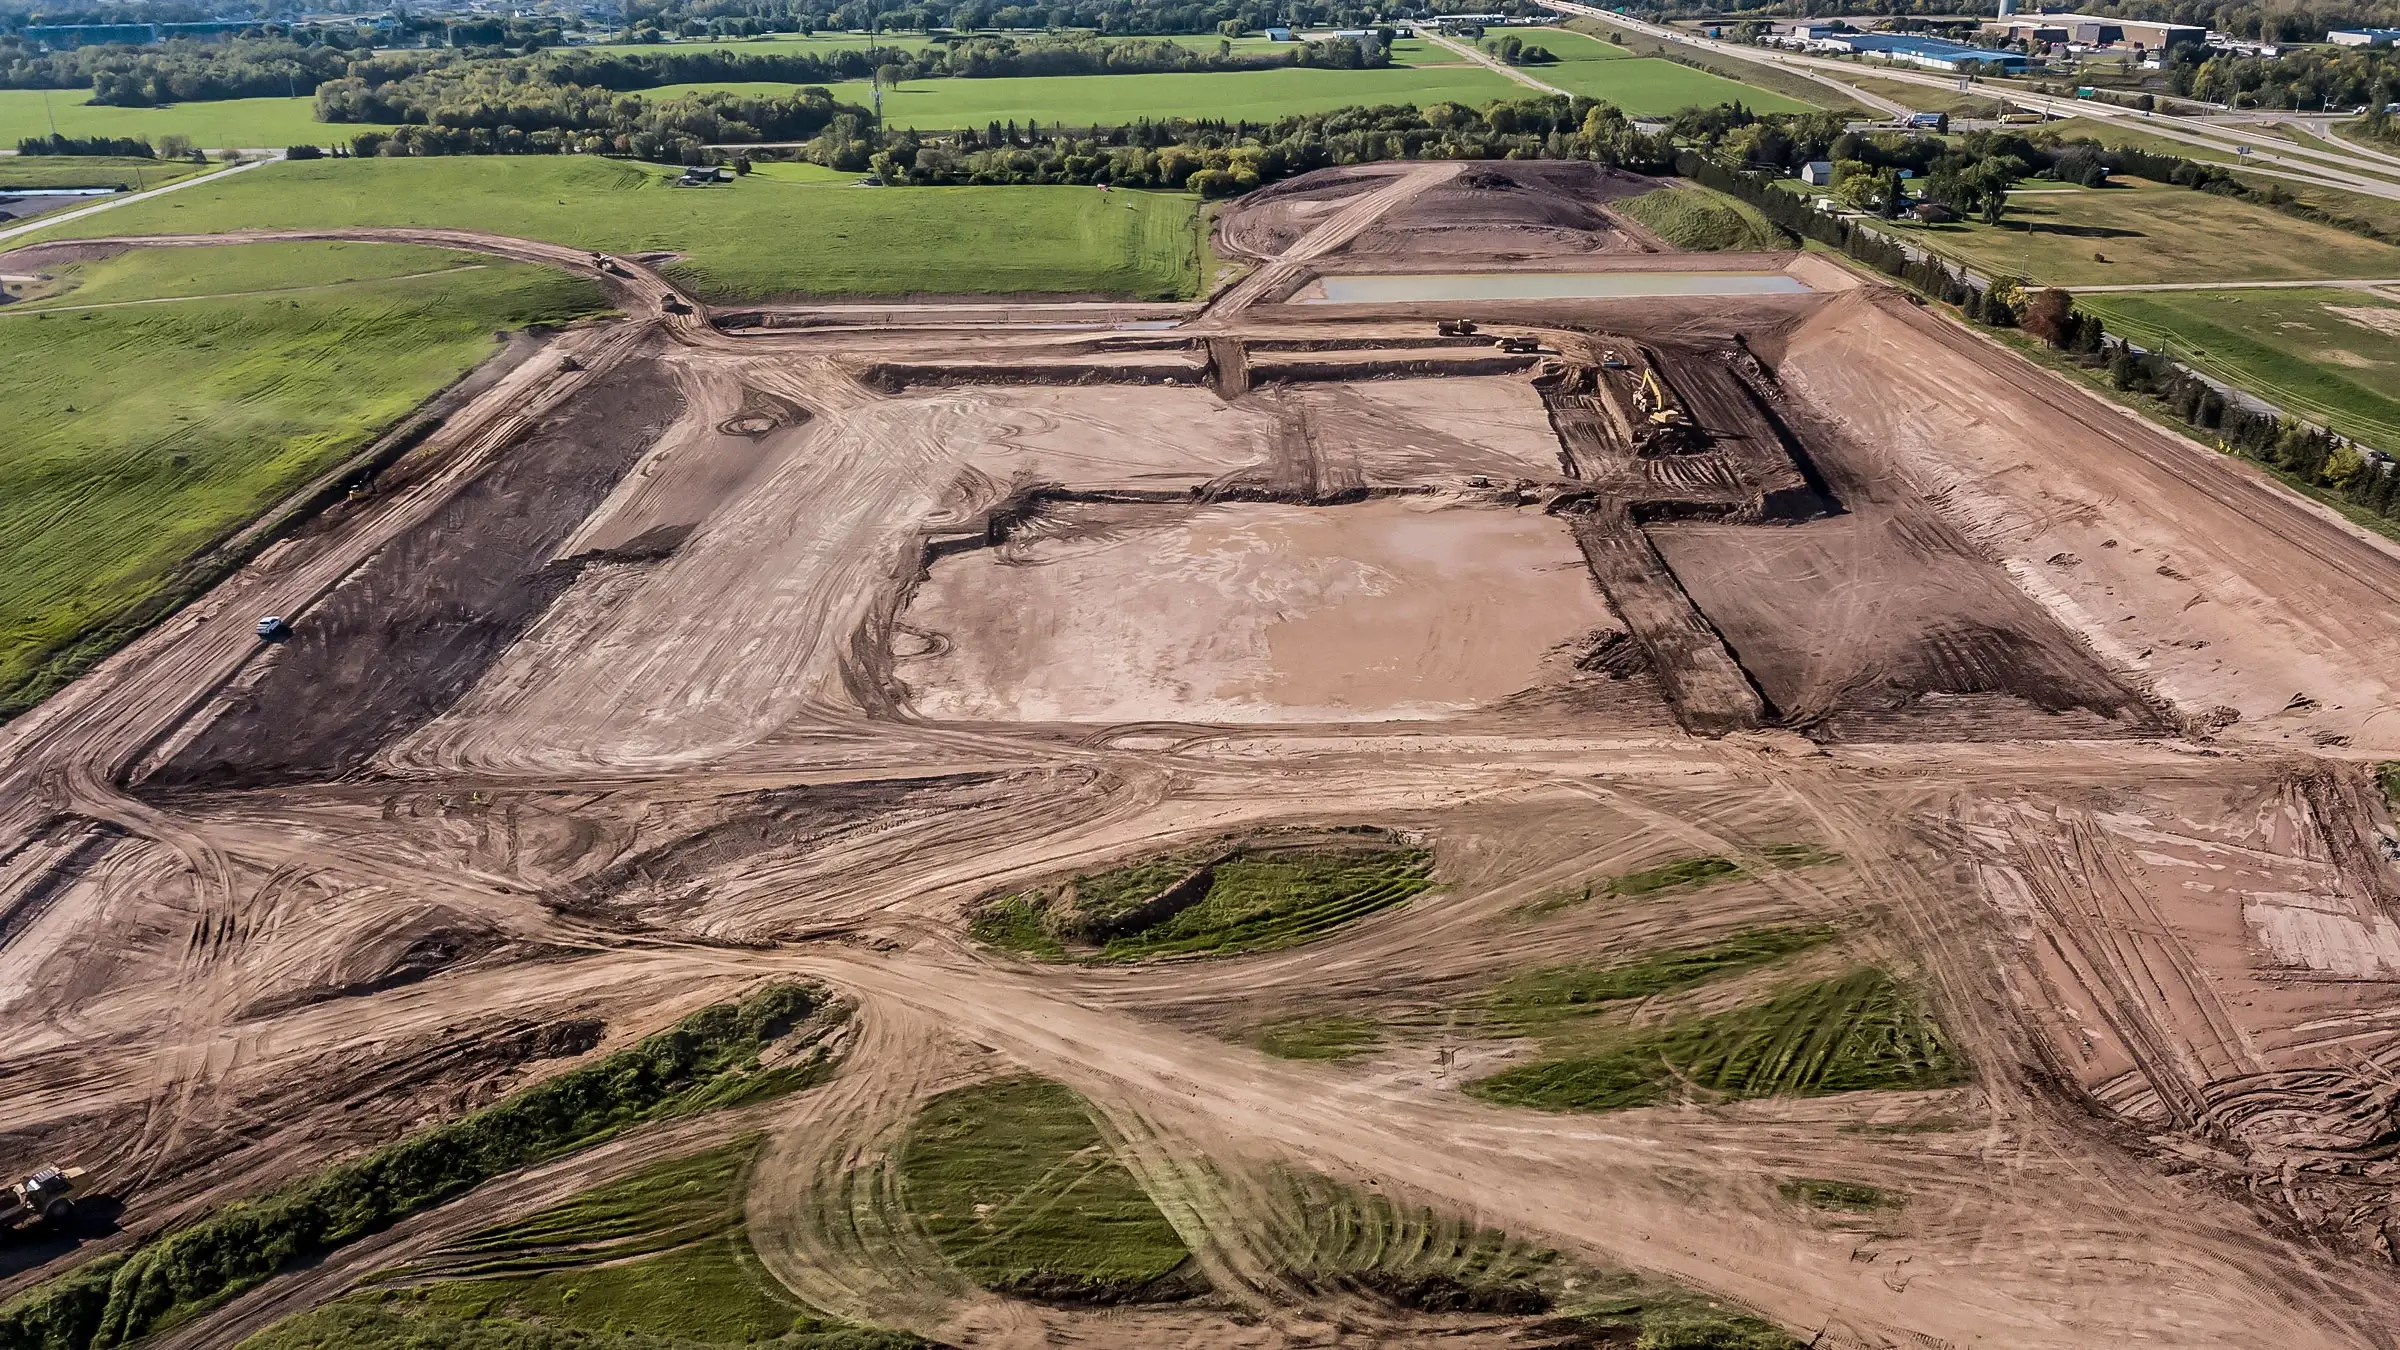 An aerial view of a large mass excavation site at a landfill